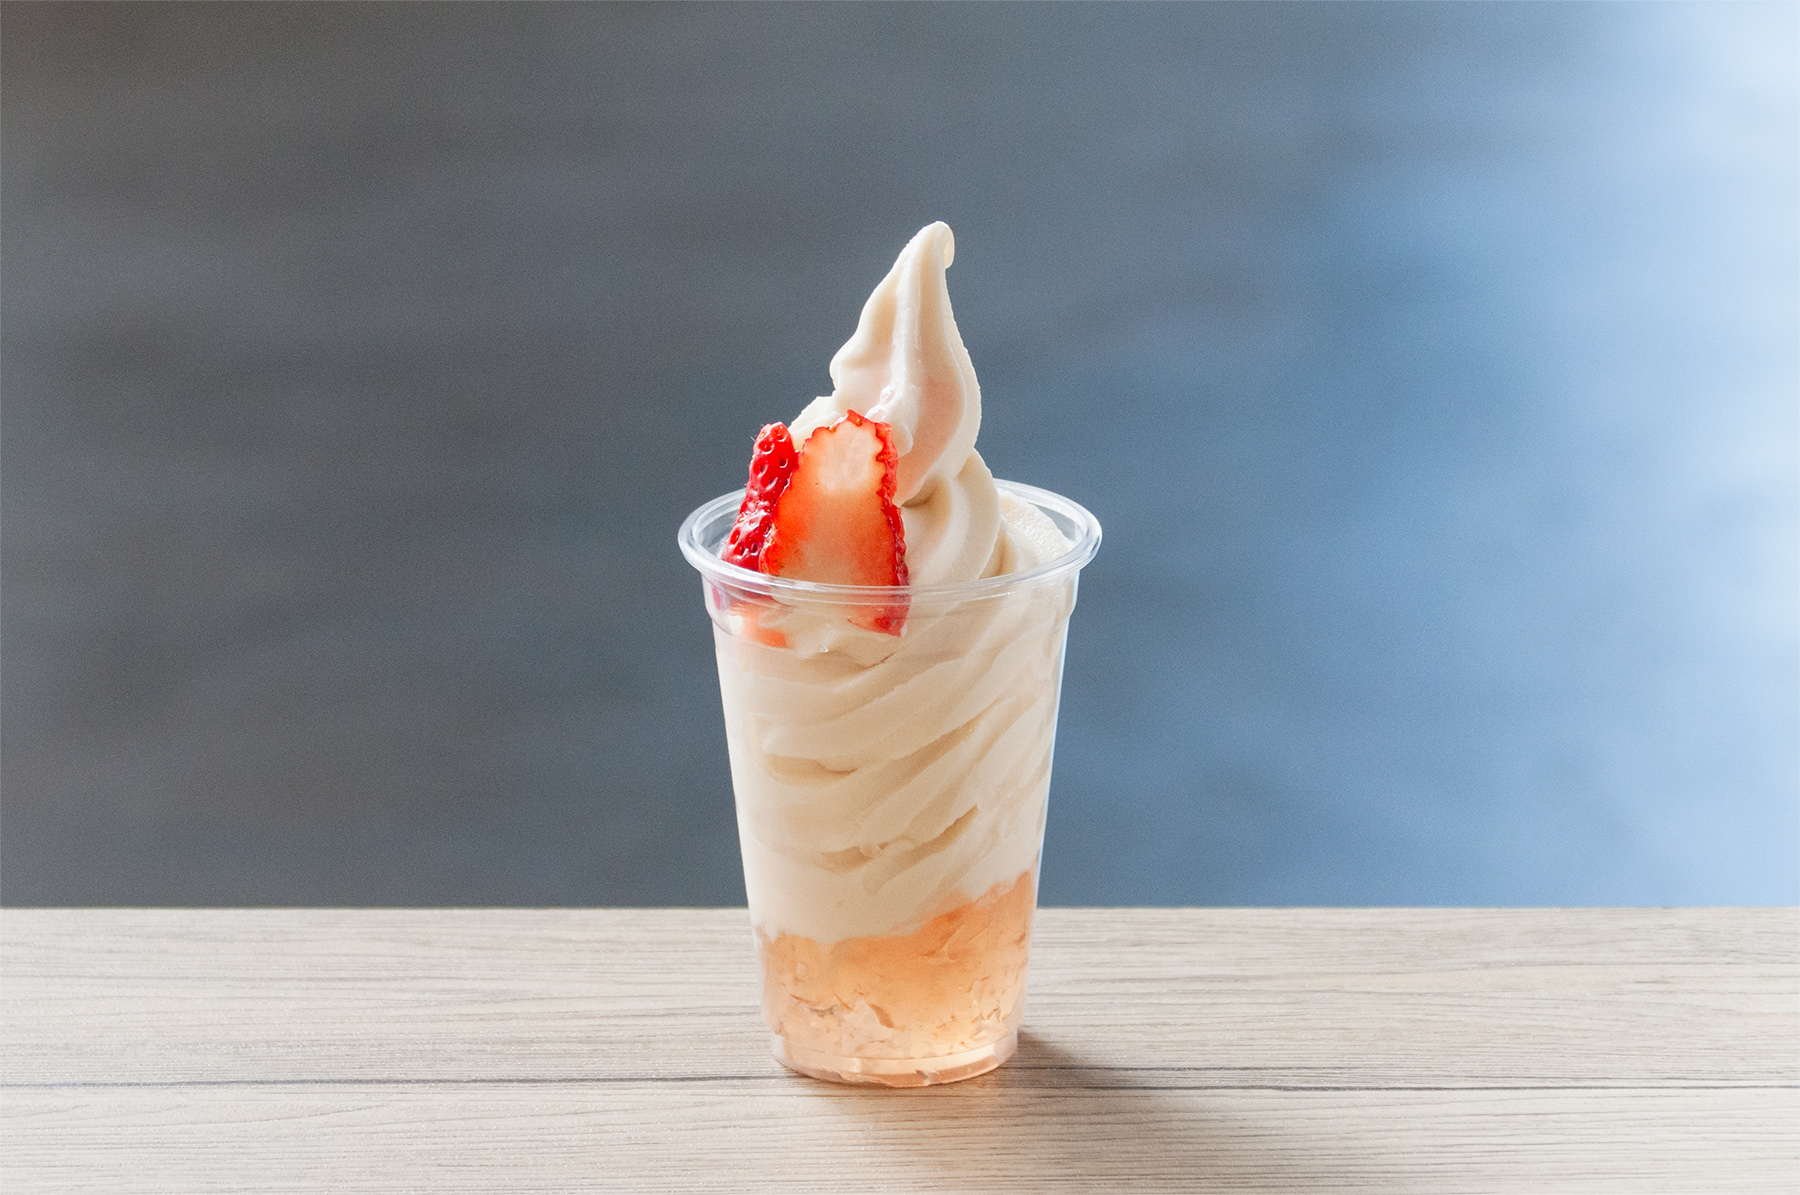 Sundae with strawberries from TaikiTown and homemade jelly